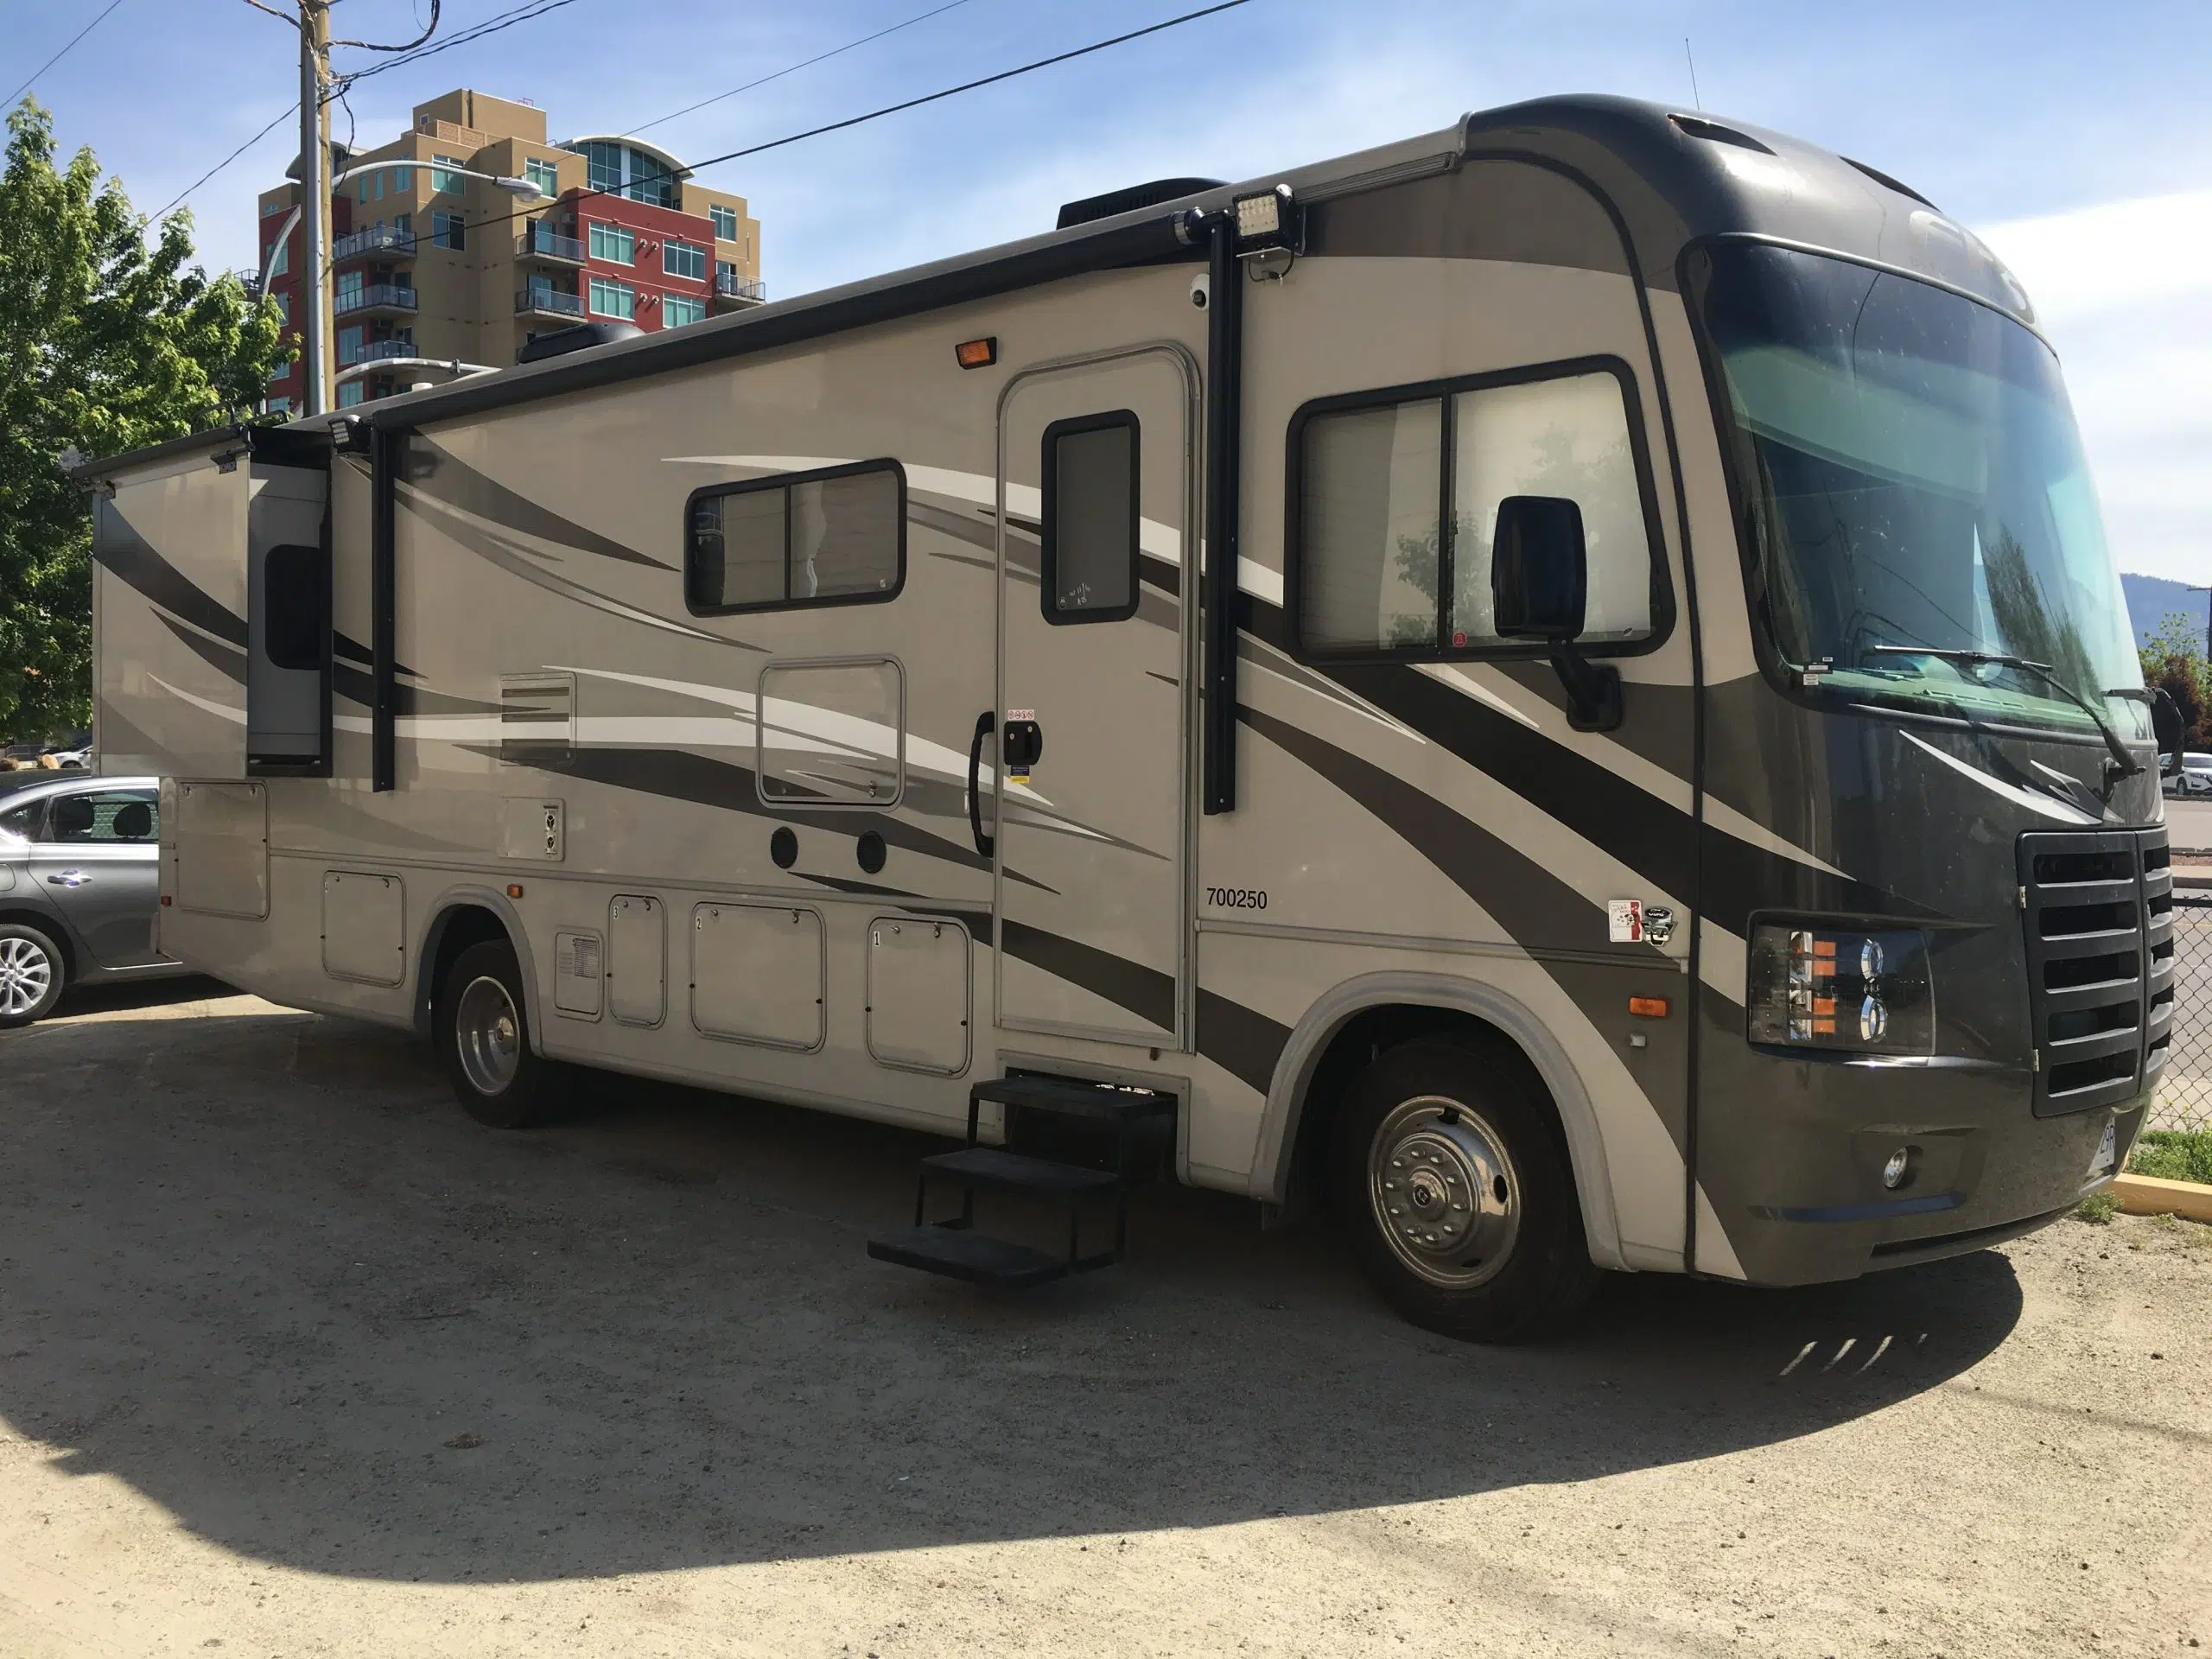 Kamloops councillor says relocating safe-consumption RV from downtown has helped address vagrancy, but is not the answer